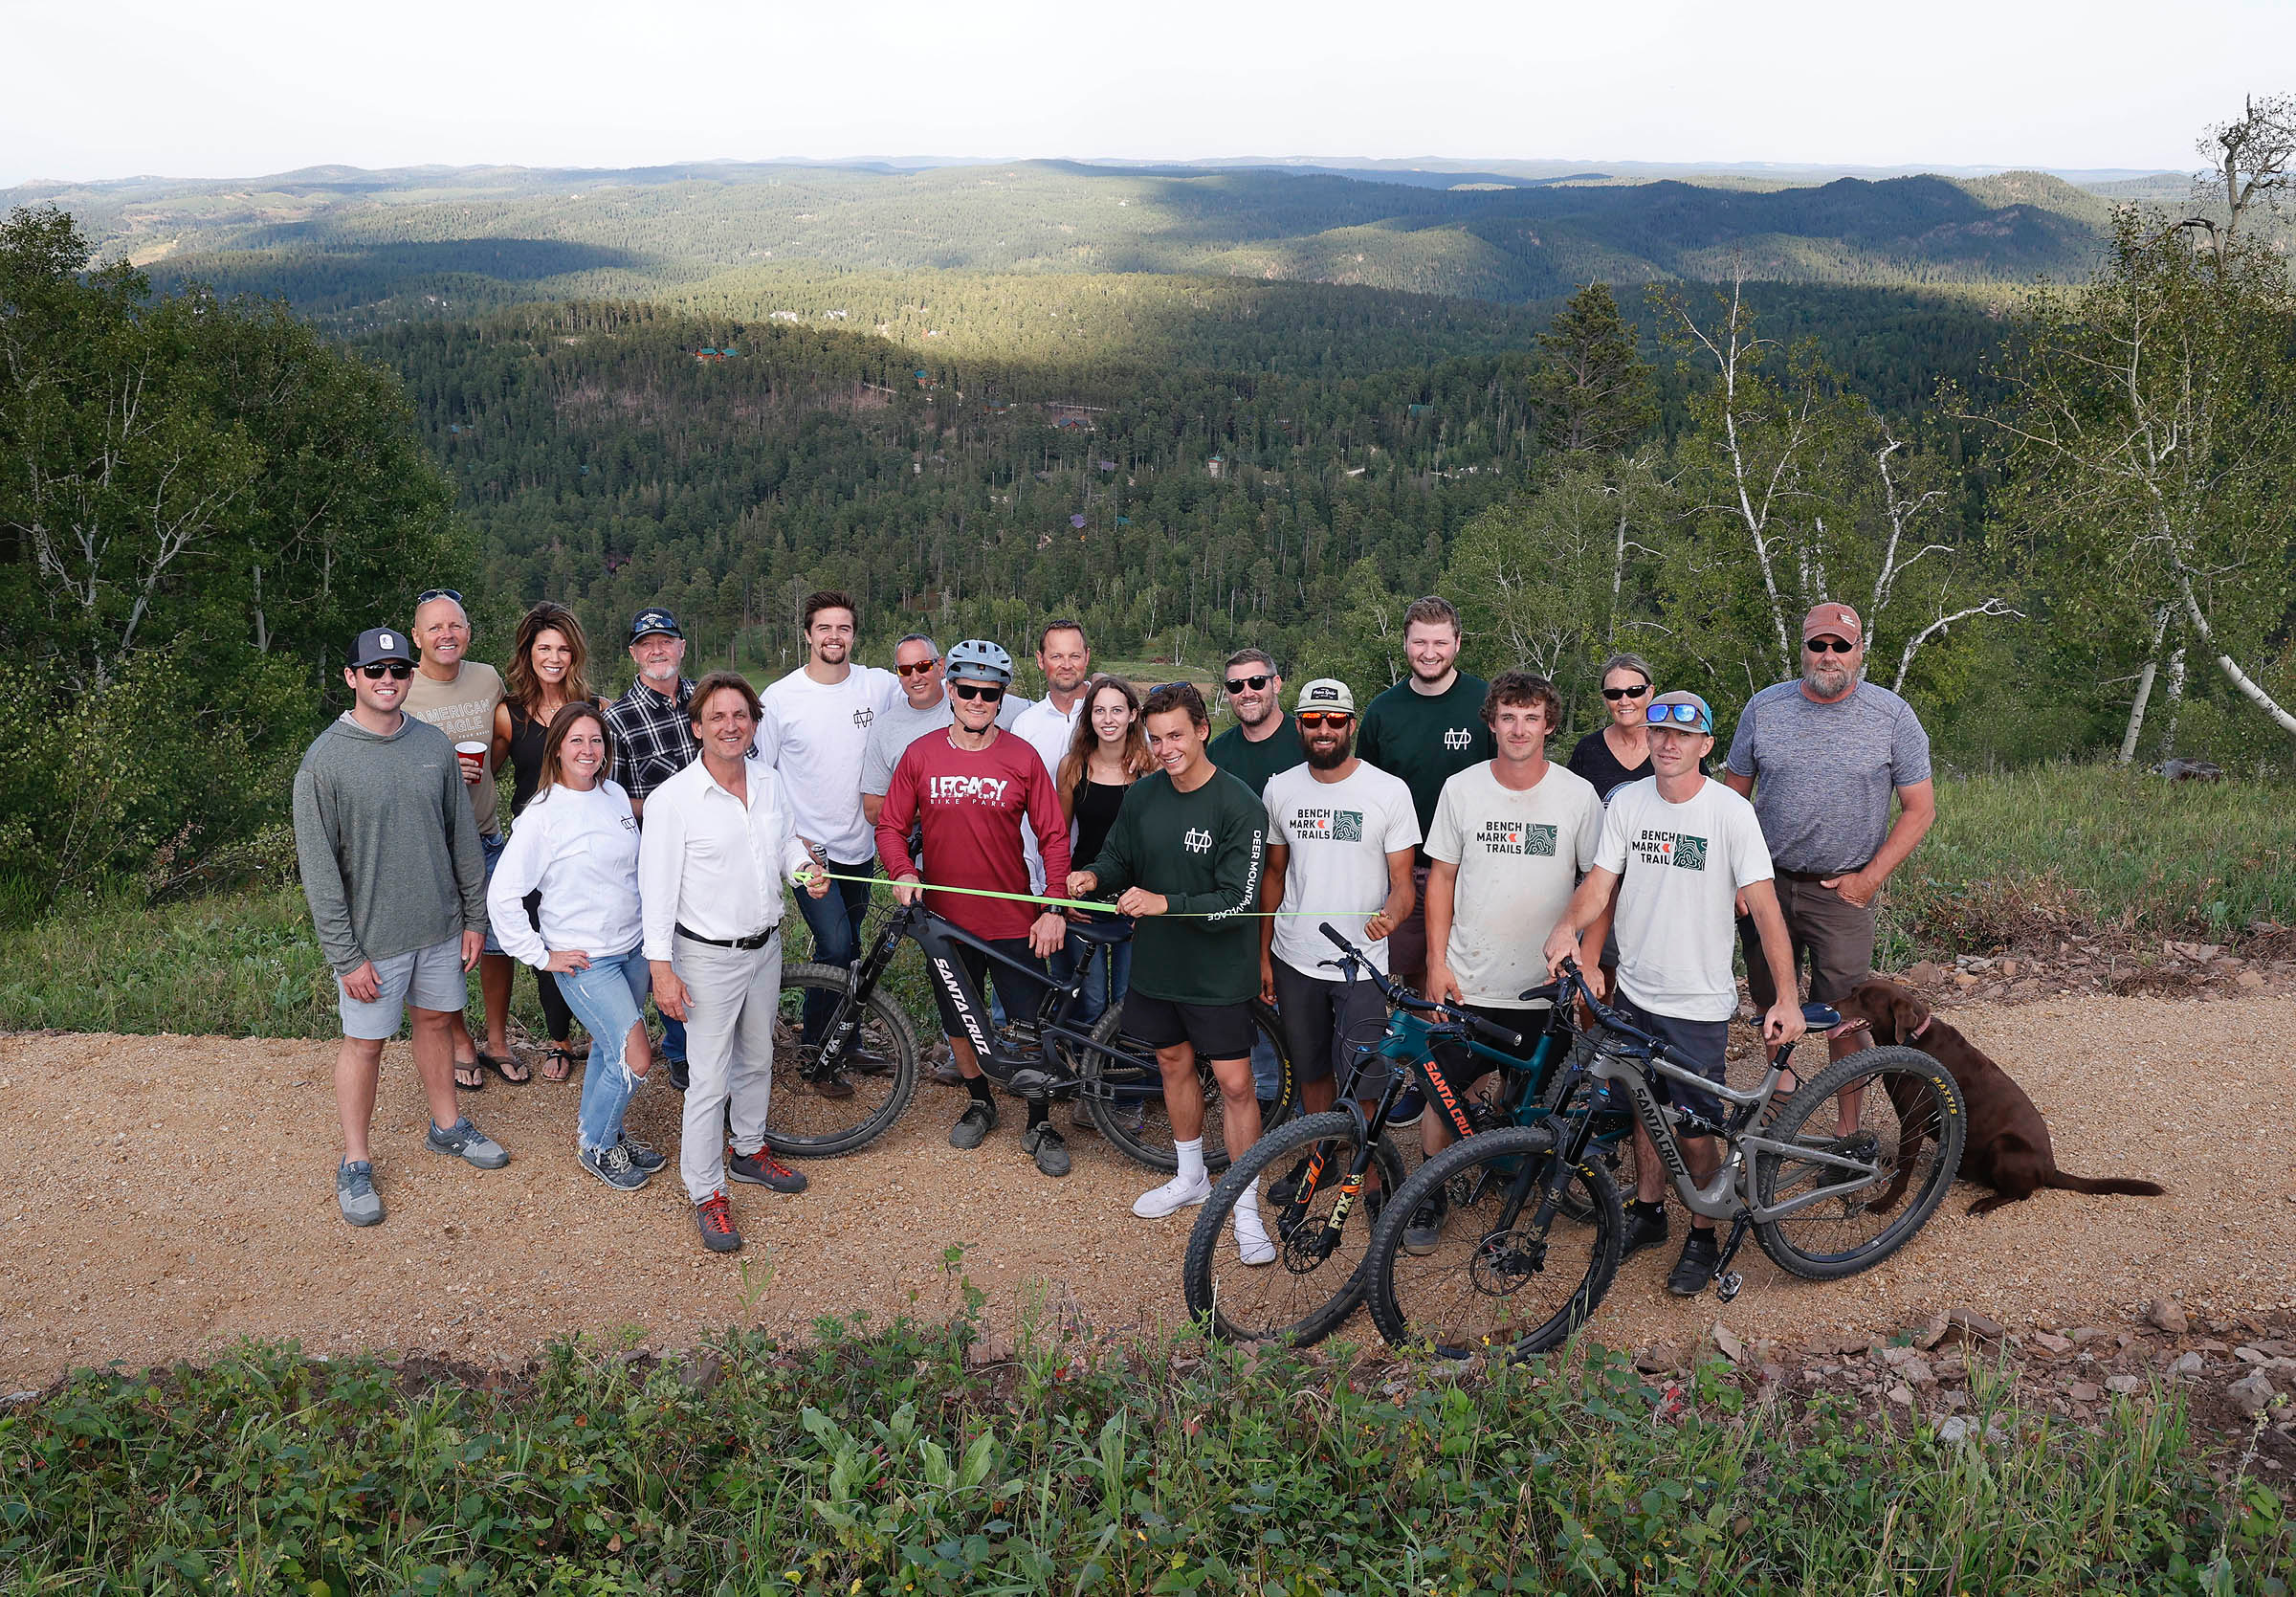 Keating Resources Announces Completion of Mountain Bike Trail at Deer Mountain Village